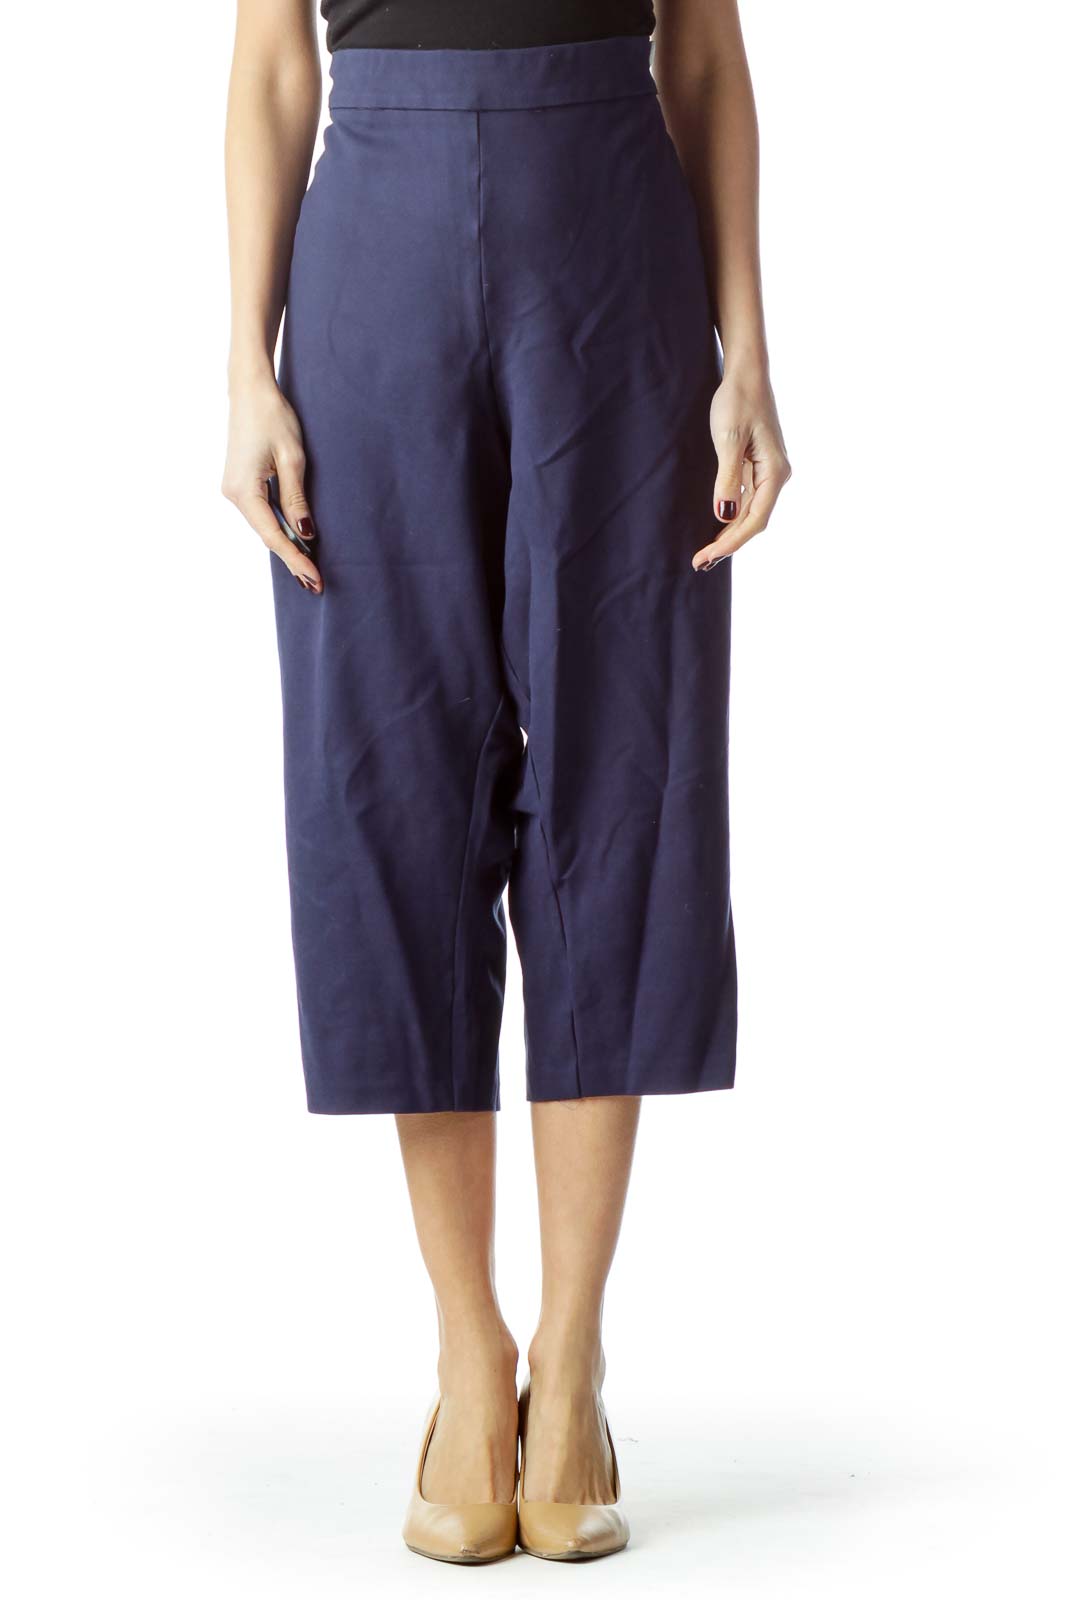 Navy Blue Cropped Pants with White Buttons Front